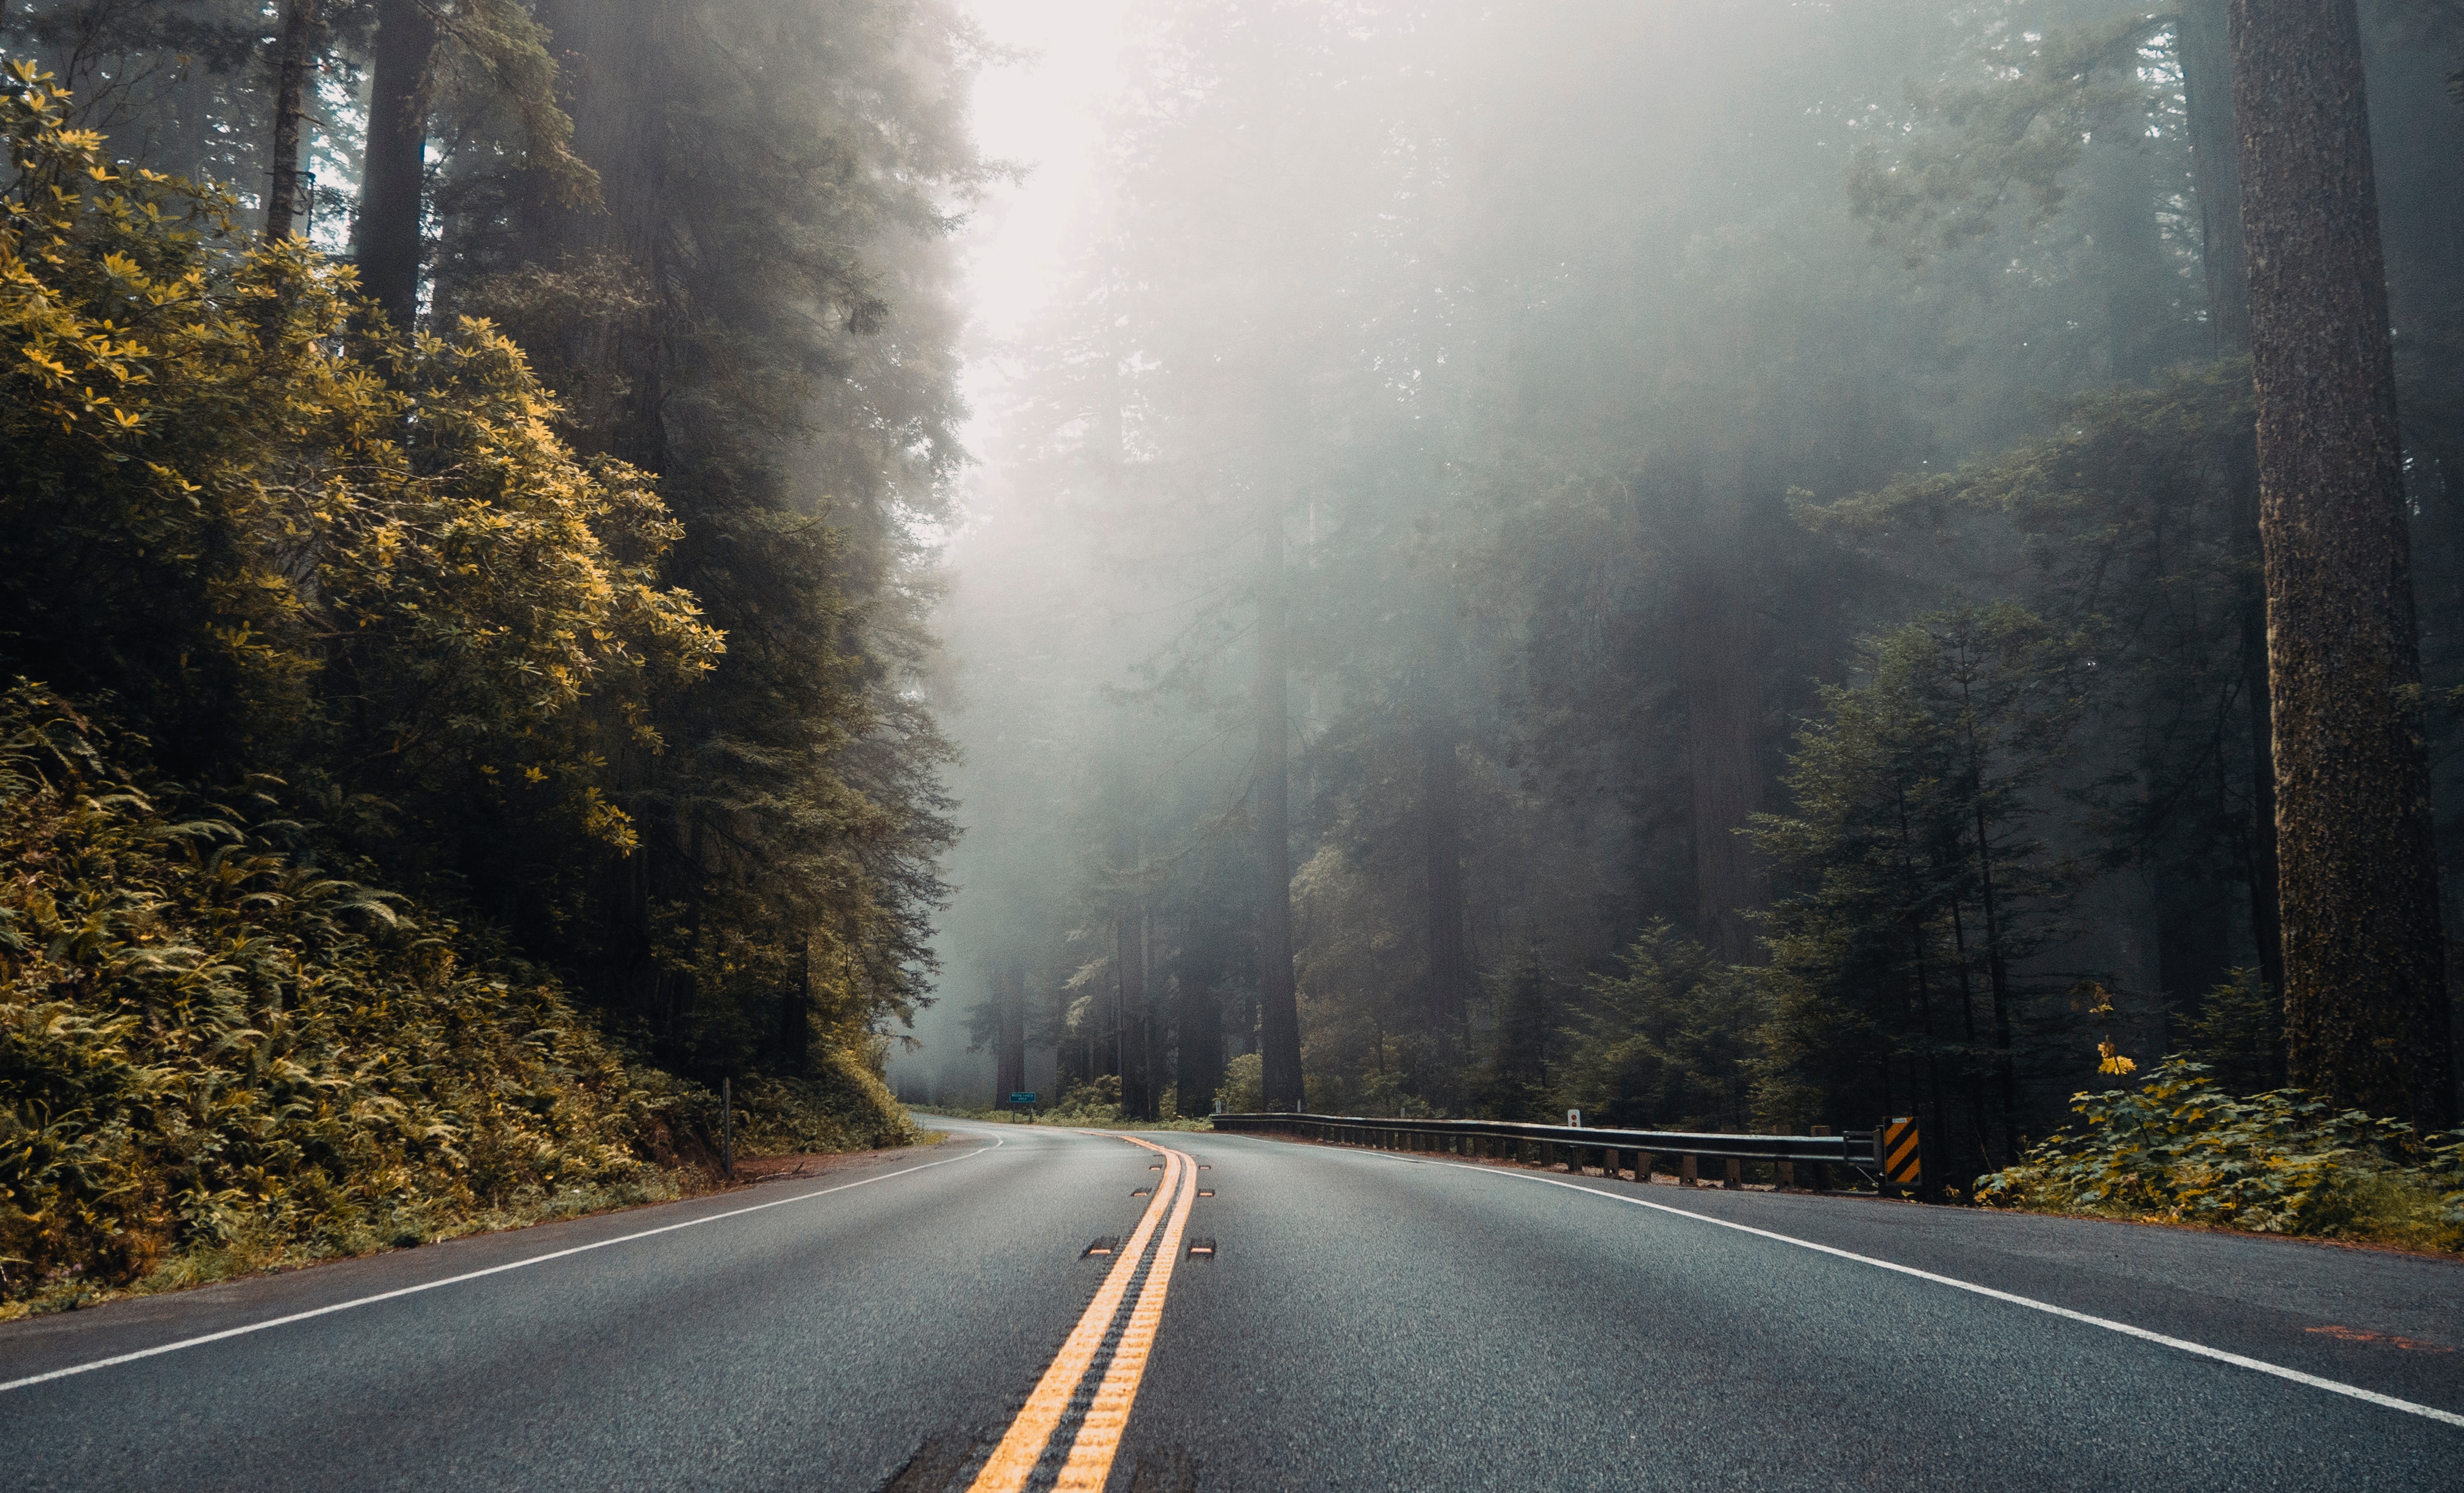 A road with trees on each side and fog over the road